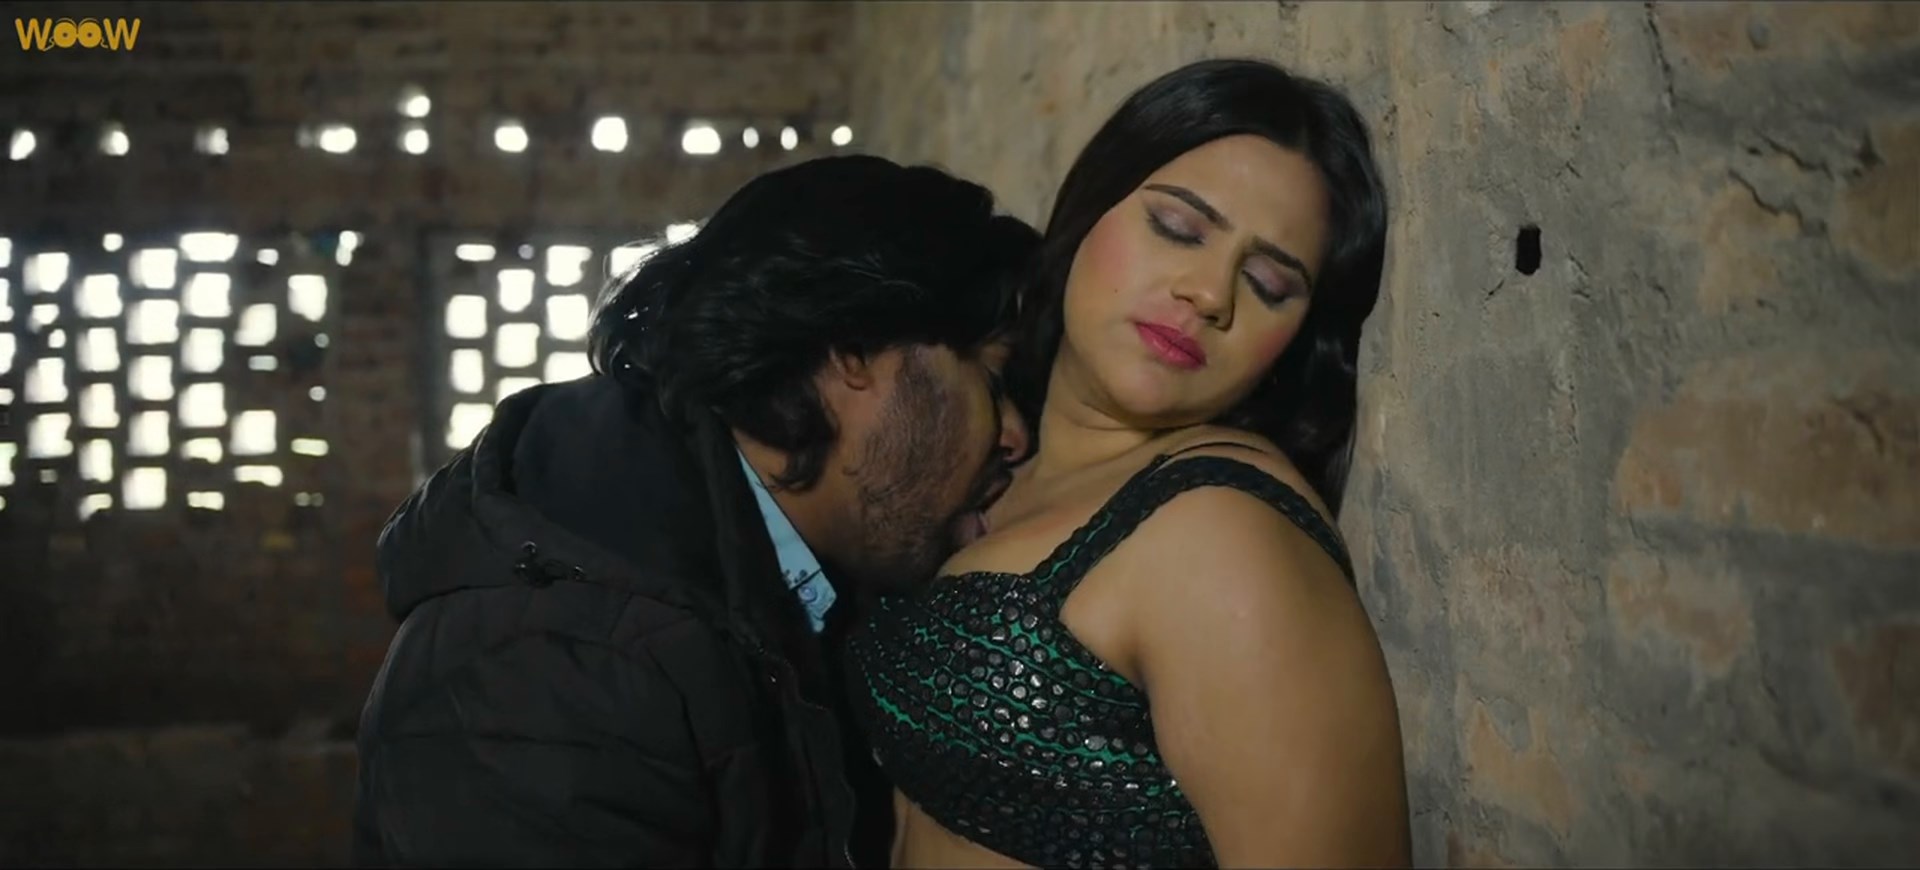 Laila S02 Torrent Yts Yify Download in HD quality 1080p and 720p 2023 Movie | kat | tpb Screen Shot 1